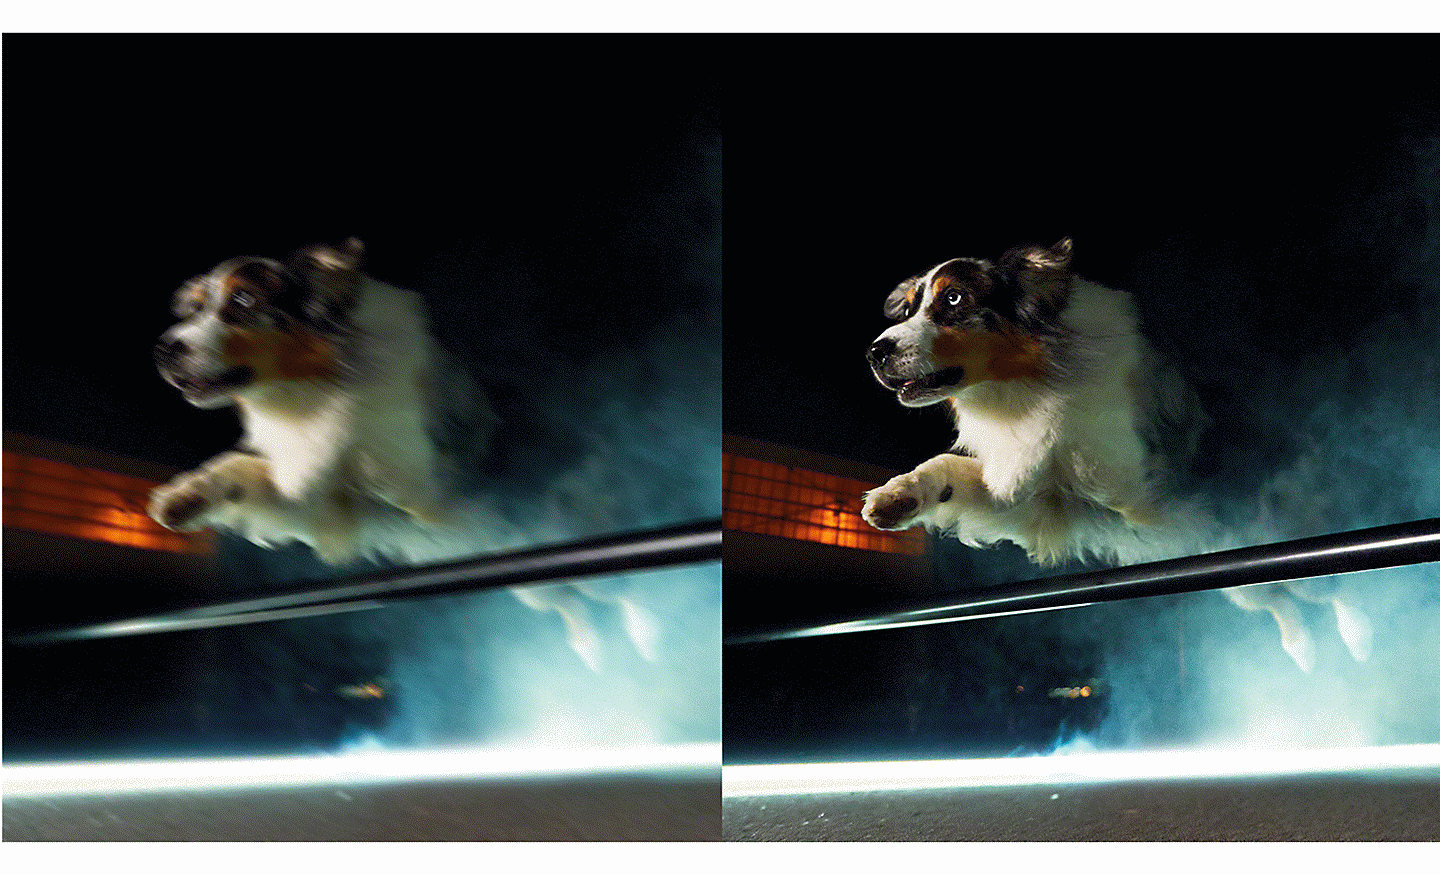 Two images of leaping dog, one blurred, one sharp.